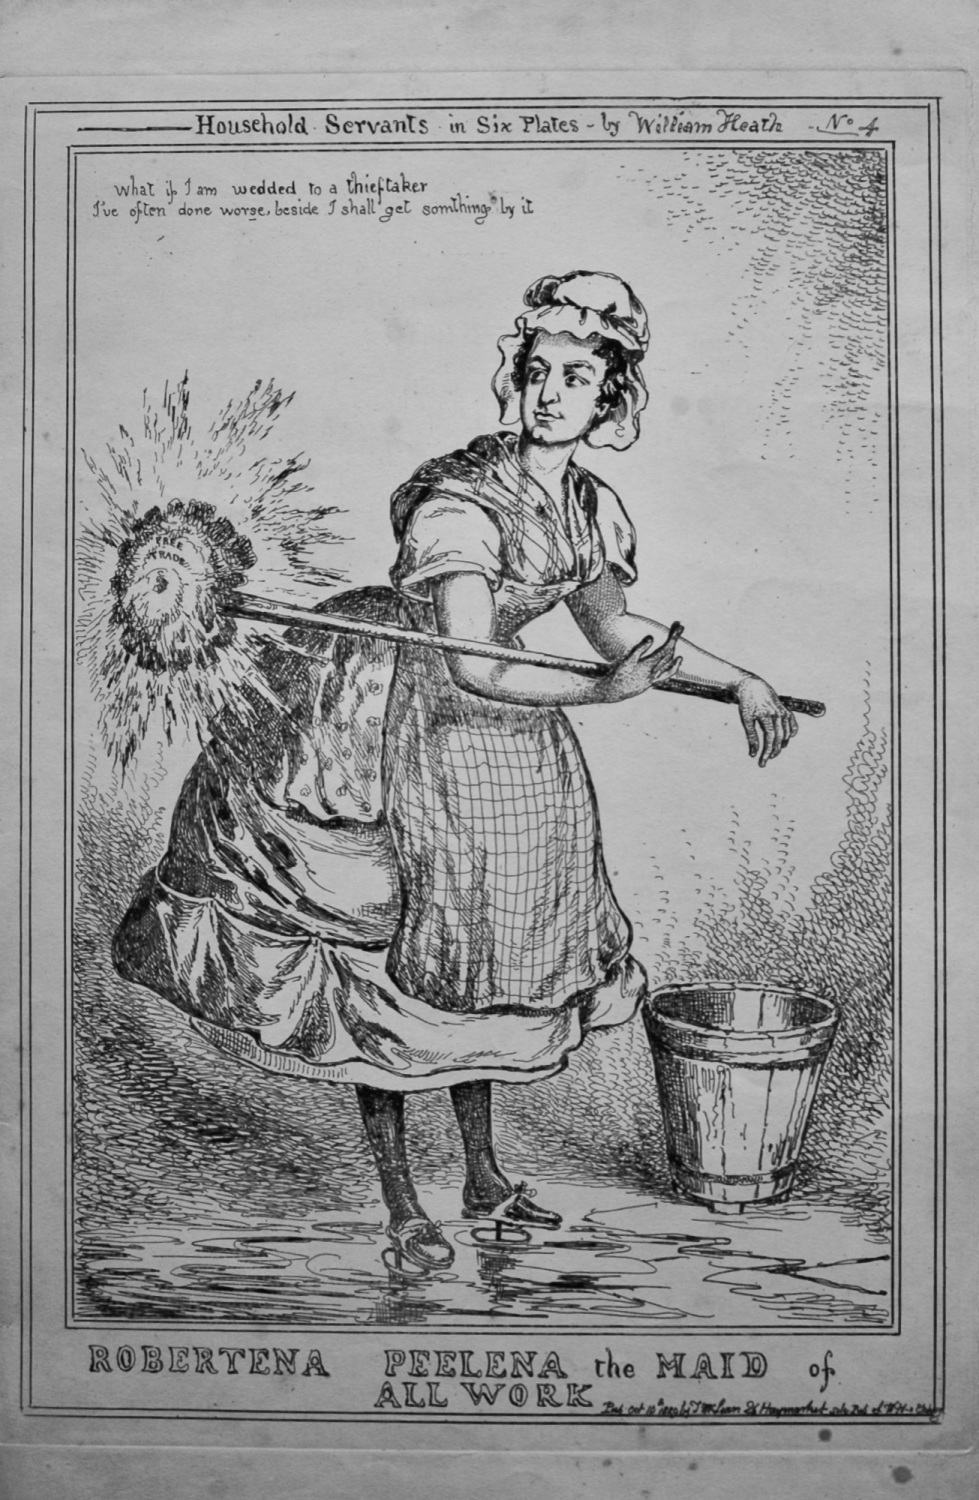 Household Servants  in Six Plates - by William Heath . 